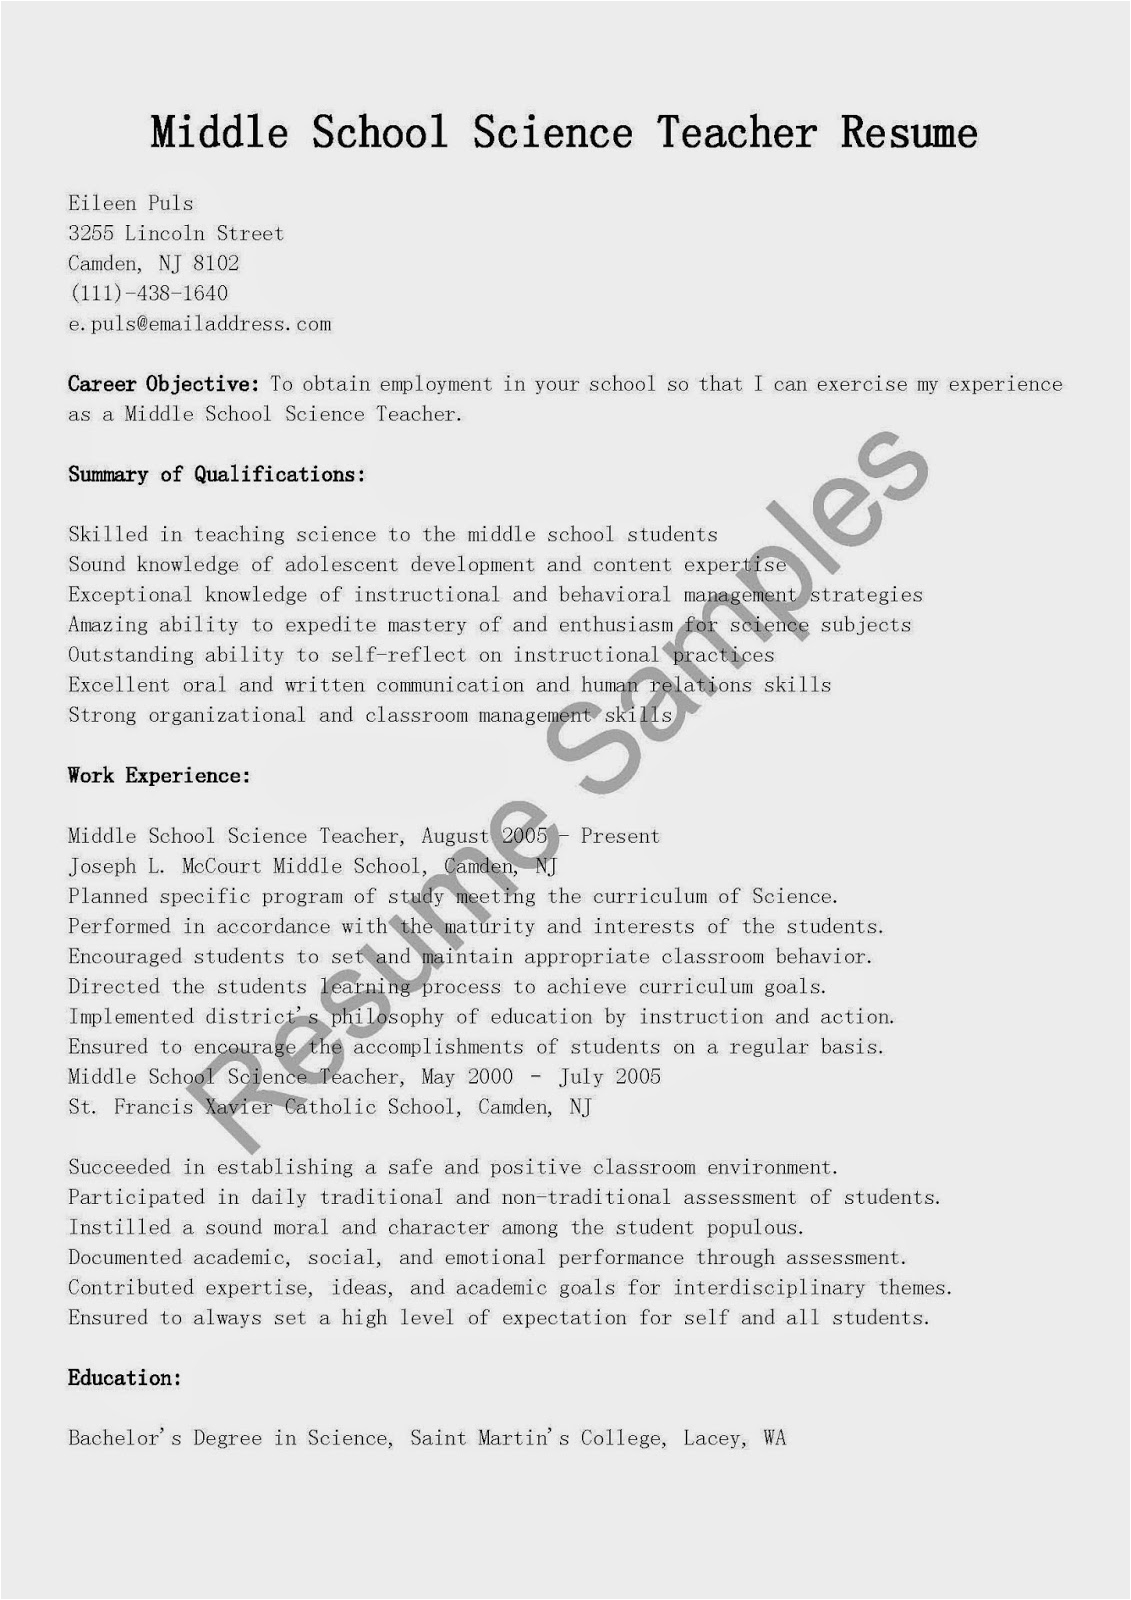 Sample Resume for Middle School Science Teacher Resume Samples Middle School Science Teacher Resume Sample